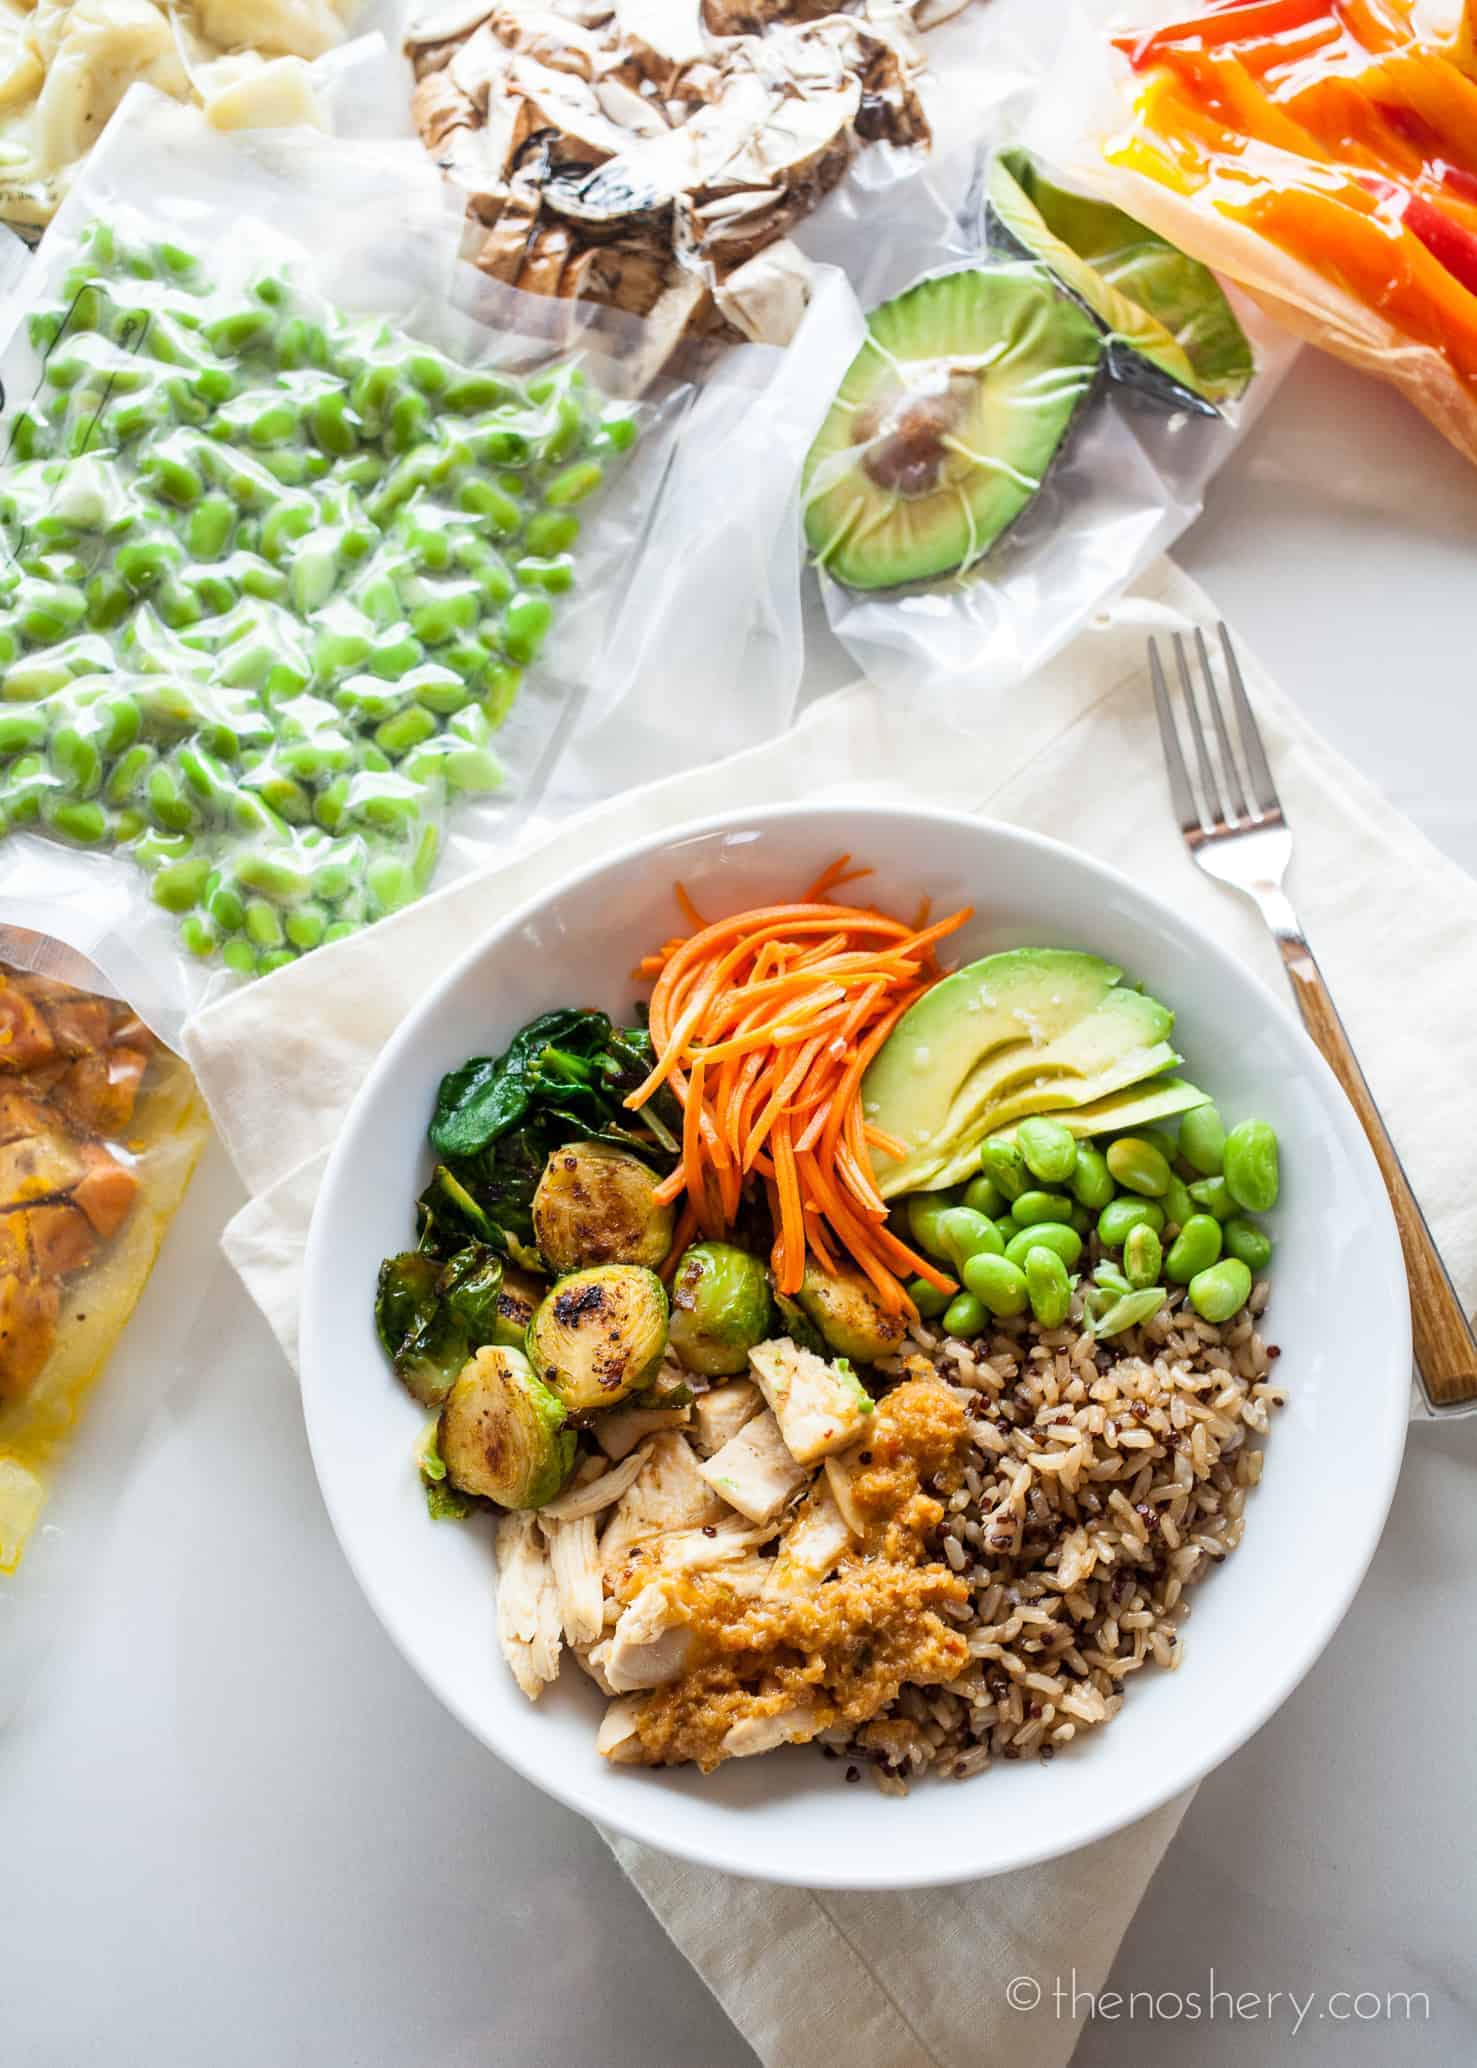 Easy Meal Prep Recipes for Healthy Lunches on the Go